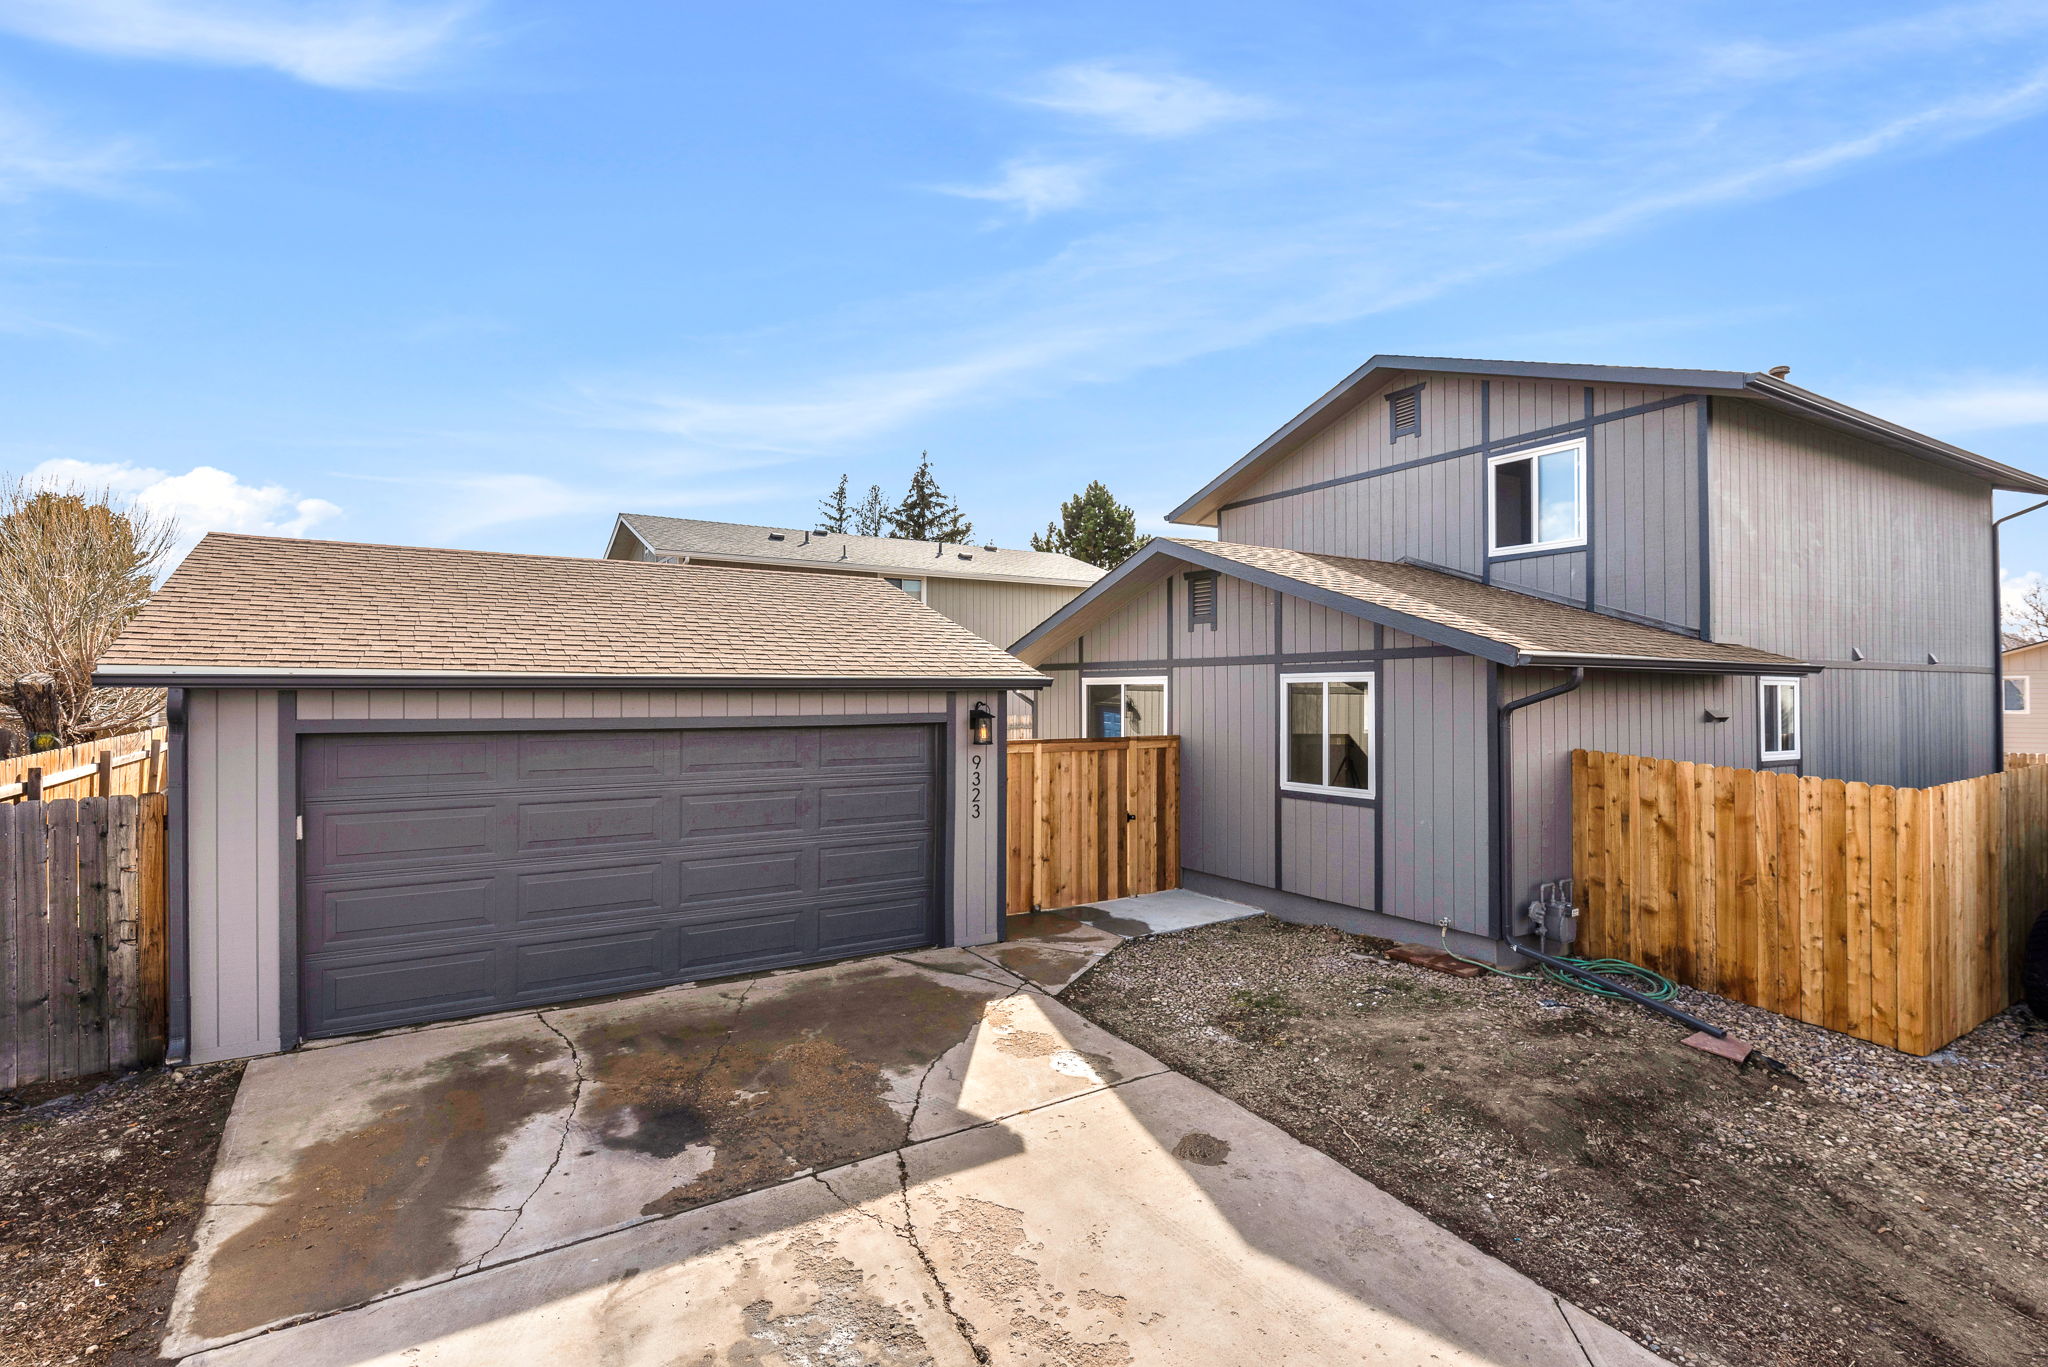  9323 N Ingalls St, Westminster, CO 80031, US